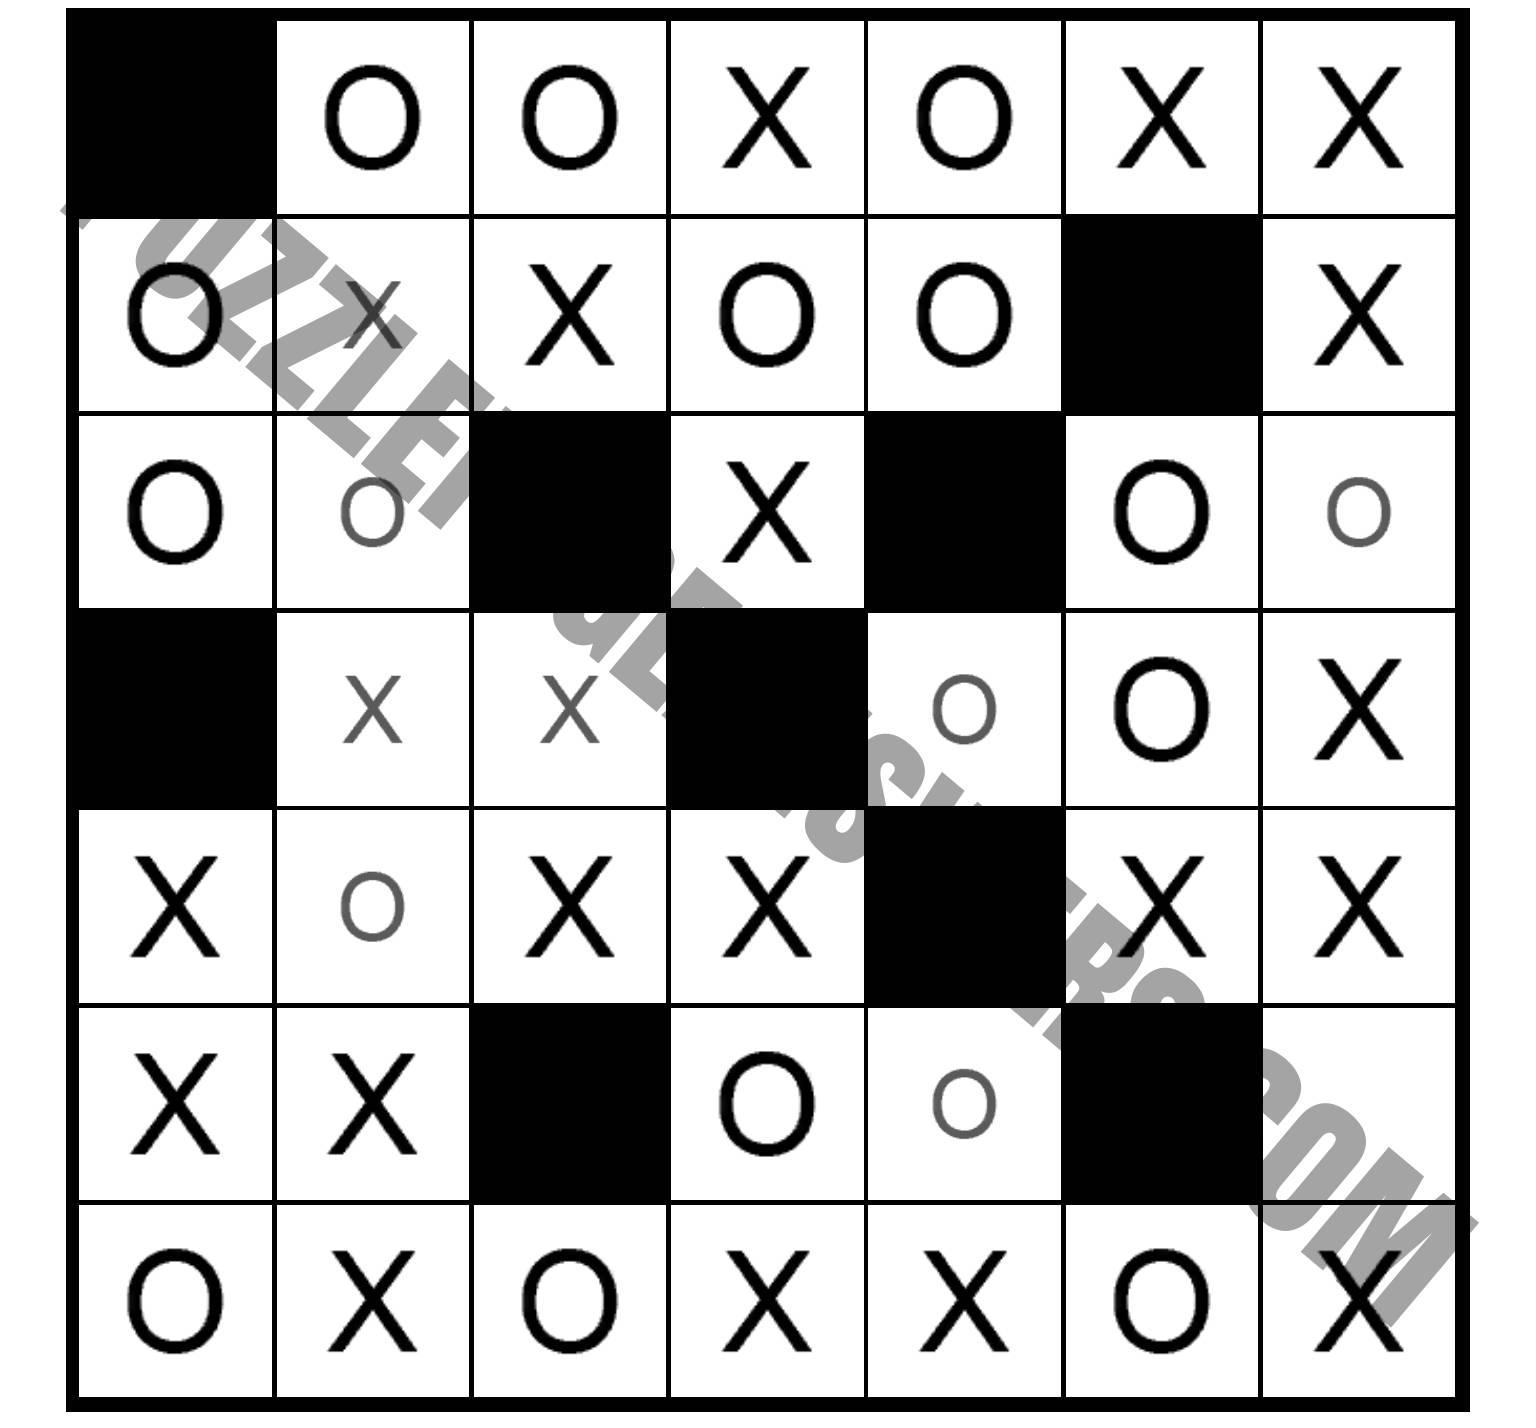 Puzzle Page Os and Xs August 1 2022 Answers PuzzlePageAnswers com